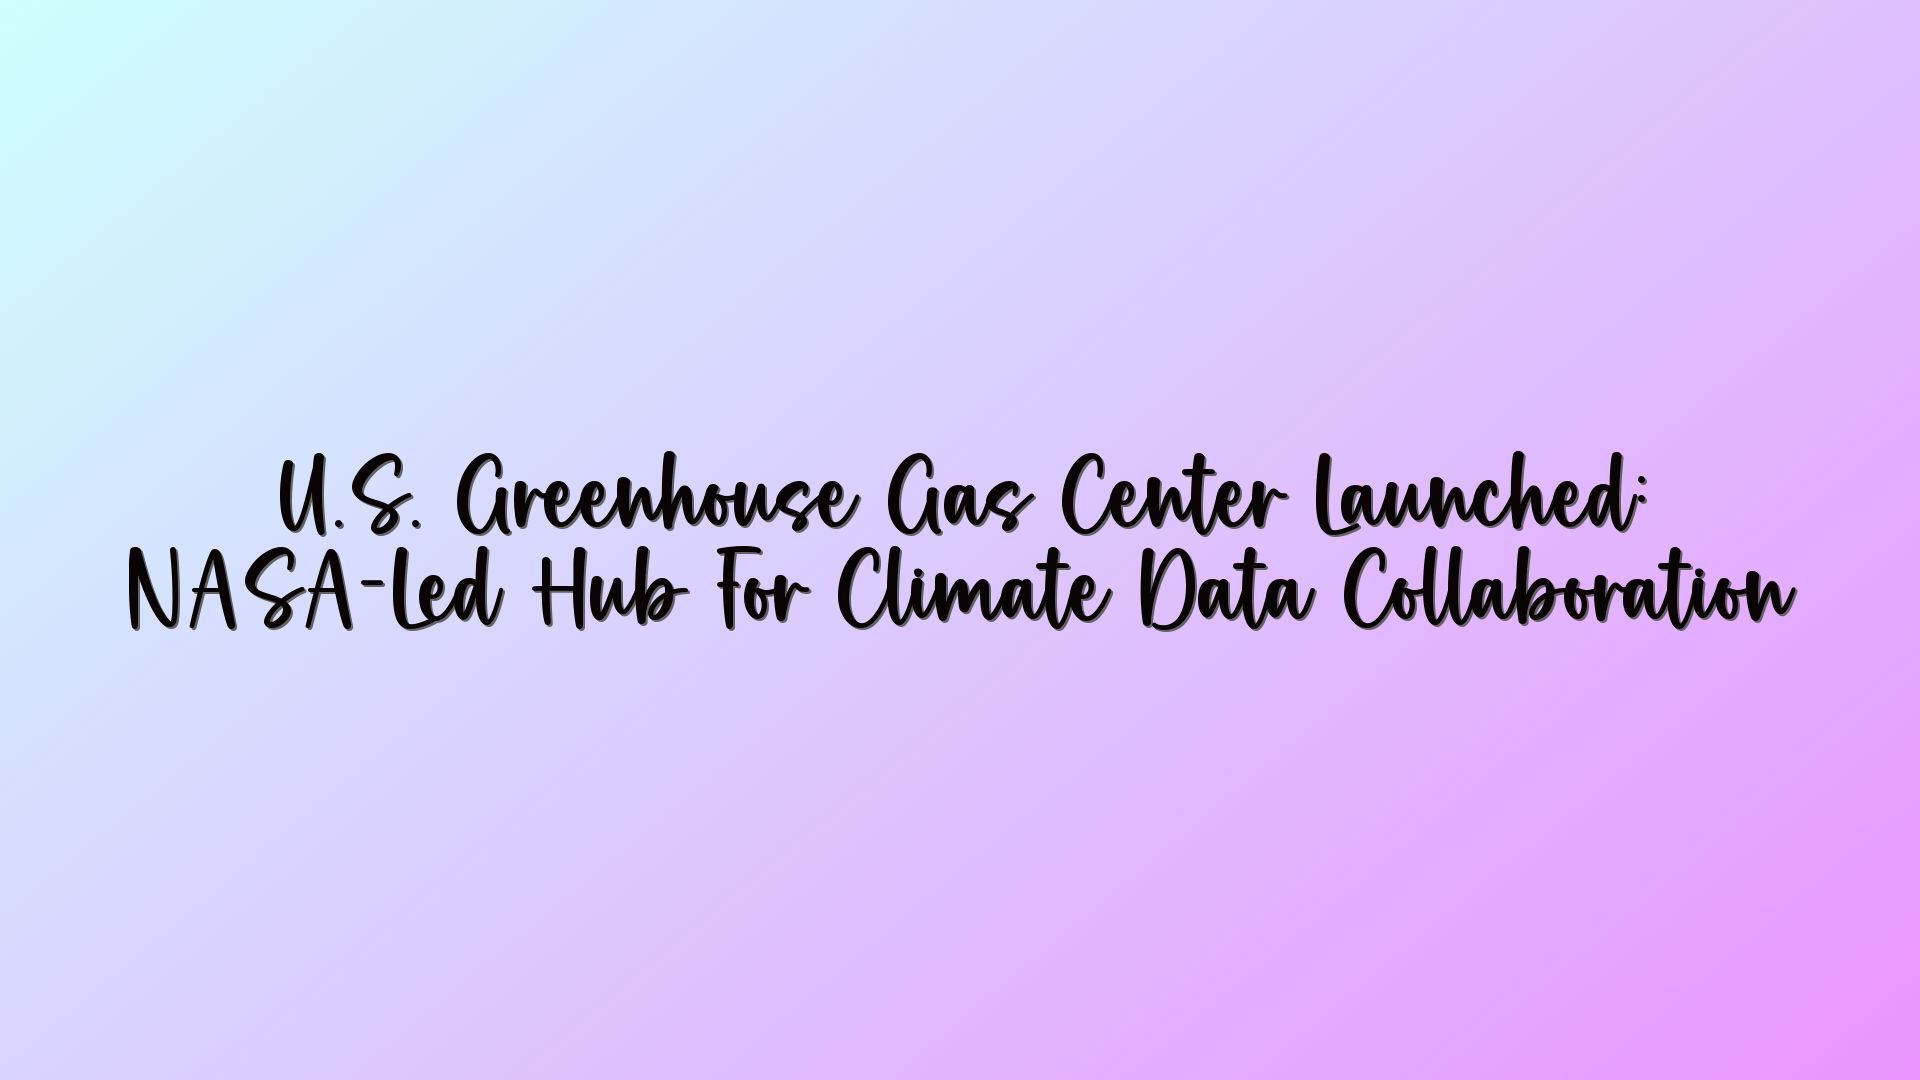 U.S. Greenhouse Gas Center Launched: NASA-Led Hub For Climate Data Collaboration